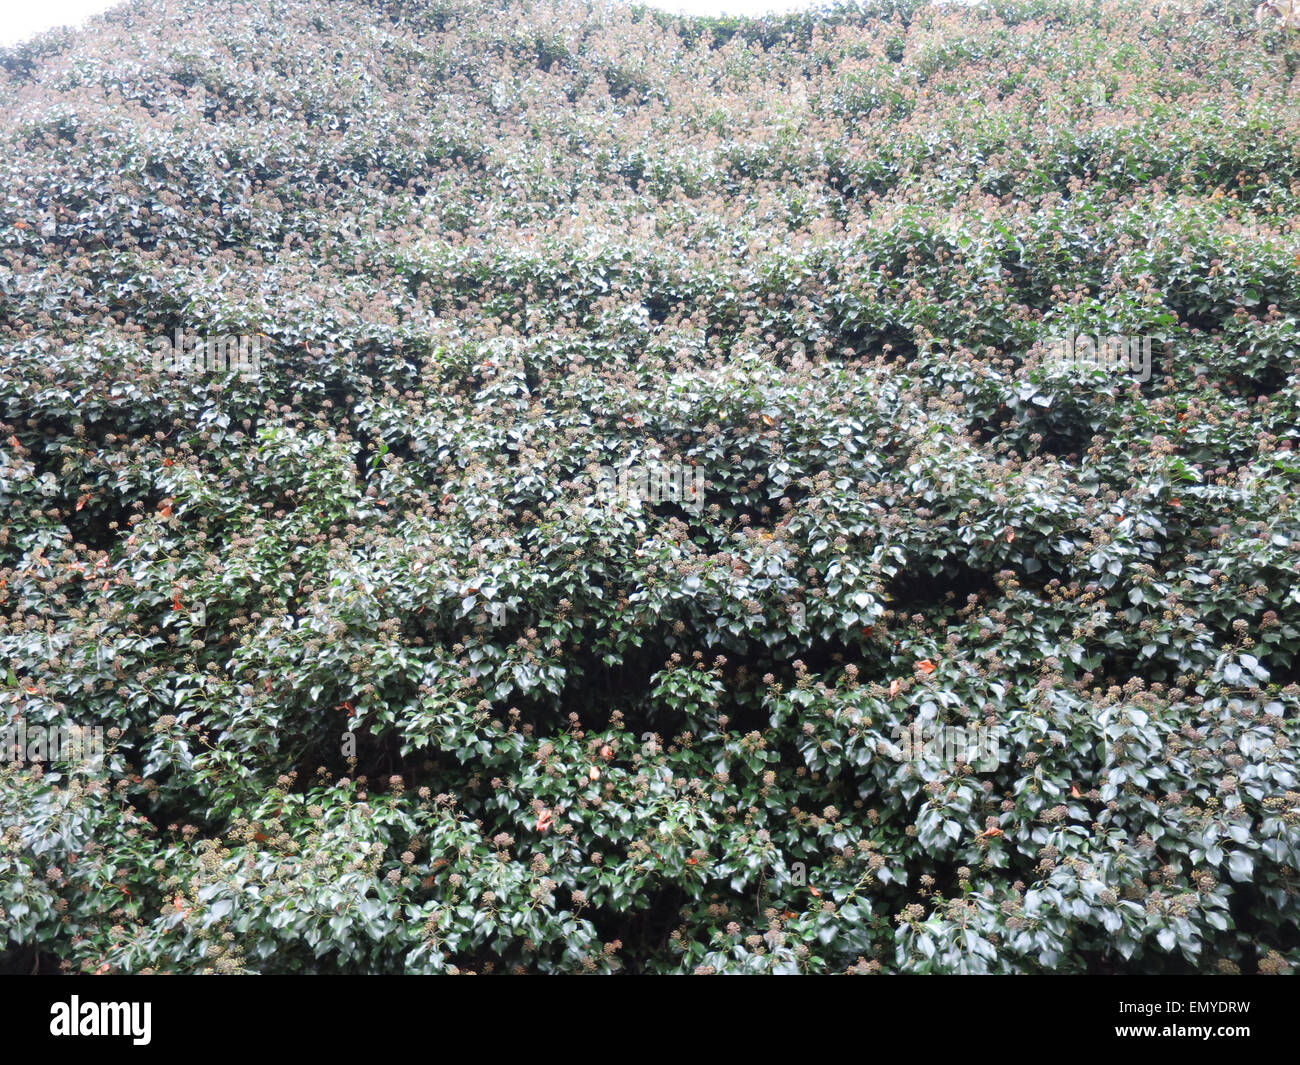 Ivy covering a wall. Stock Photo